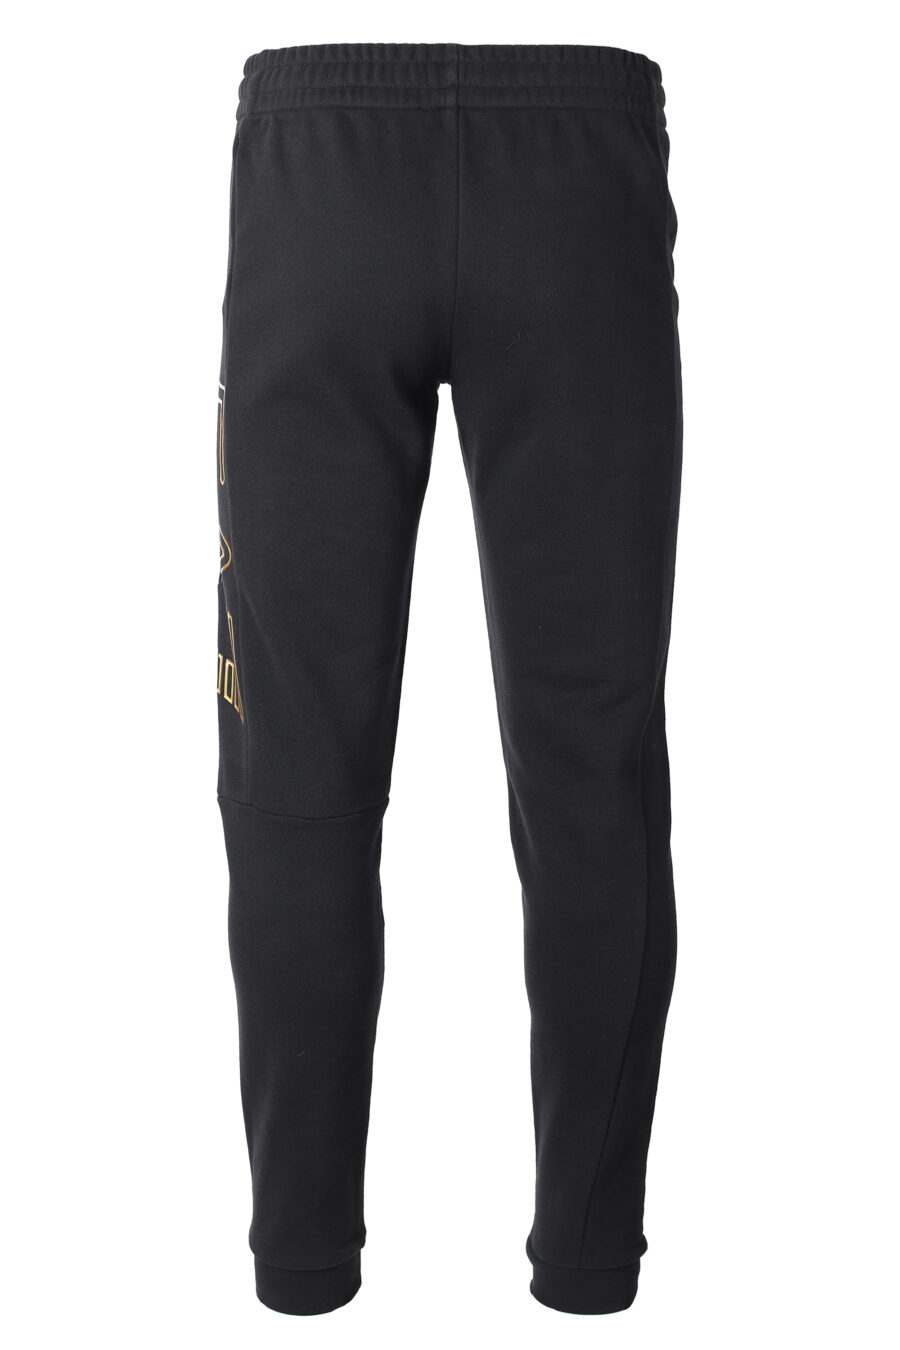 Tracksuit bottoms black with two-tone maxi logo on the side - IMG 9883